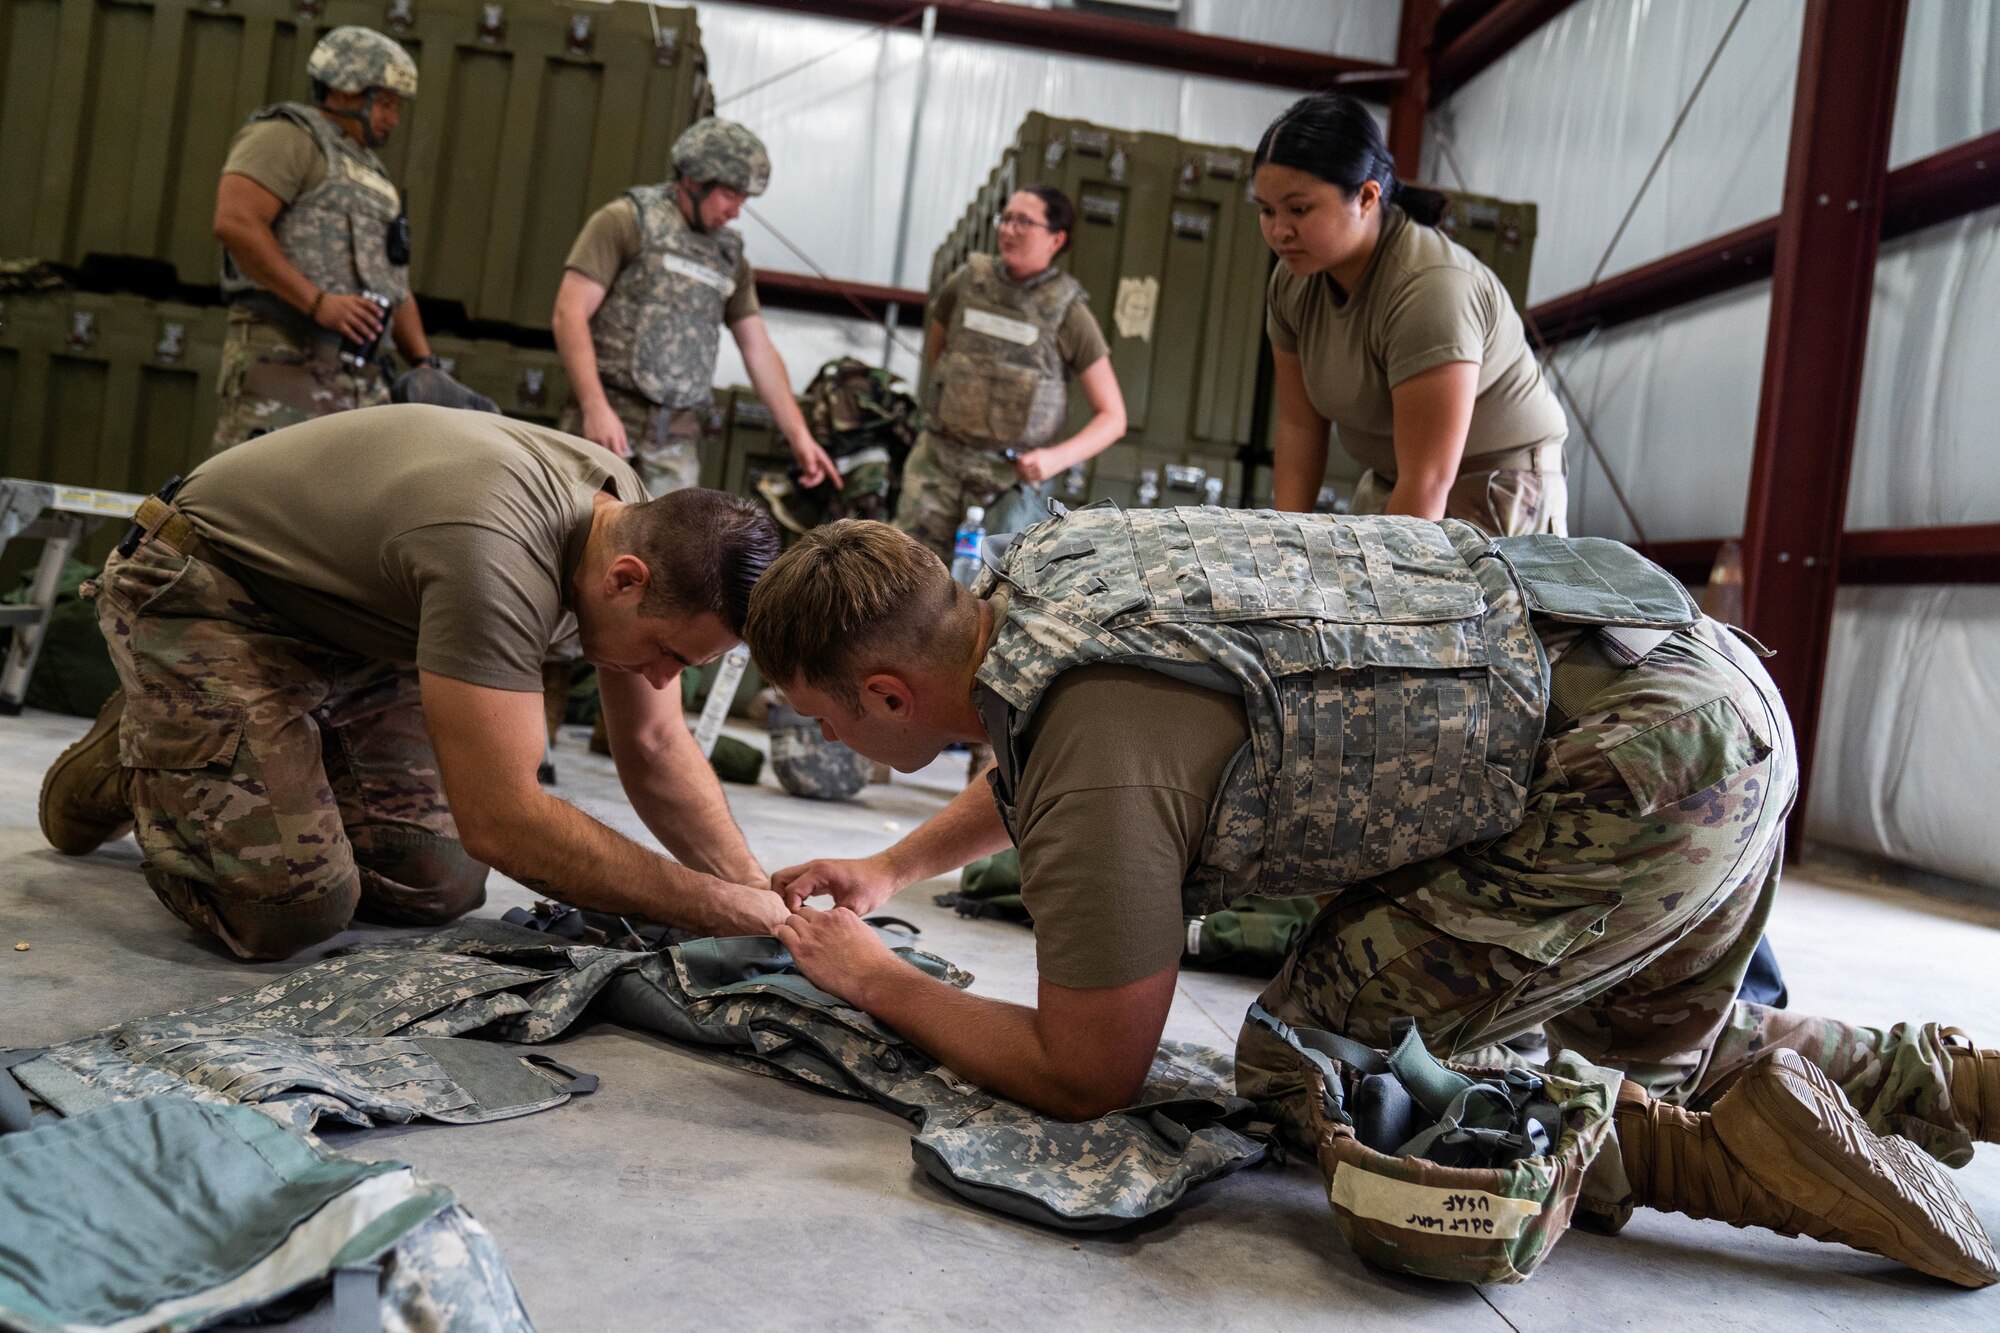 Airmen assigned to 647th Civil Engineer Squadron assemble a kevlar vest in preparation for training Exercise TROPIC FURY at Joint Base Pearl Harbor-Hickam, Hawaii, March 8, 2022. The third phase of the exercise tests the 15th Wing’s capability to plan, generate and execute a deployment tasking and the ability to establish a forward operating base in a combat environment. (U.S. Air Force photo by Airman 1st Class Makensie Cooper)